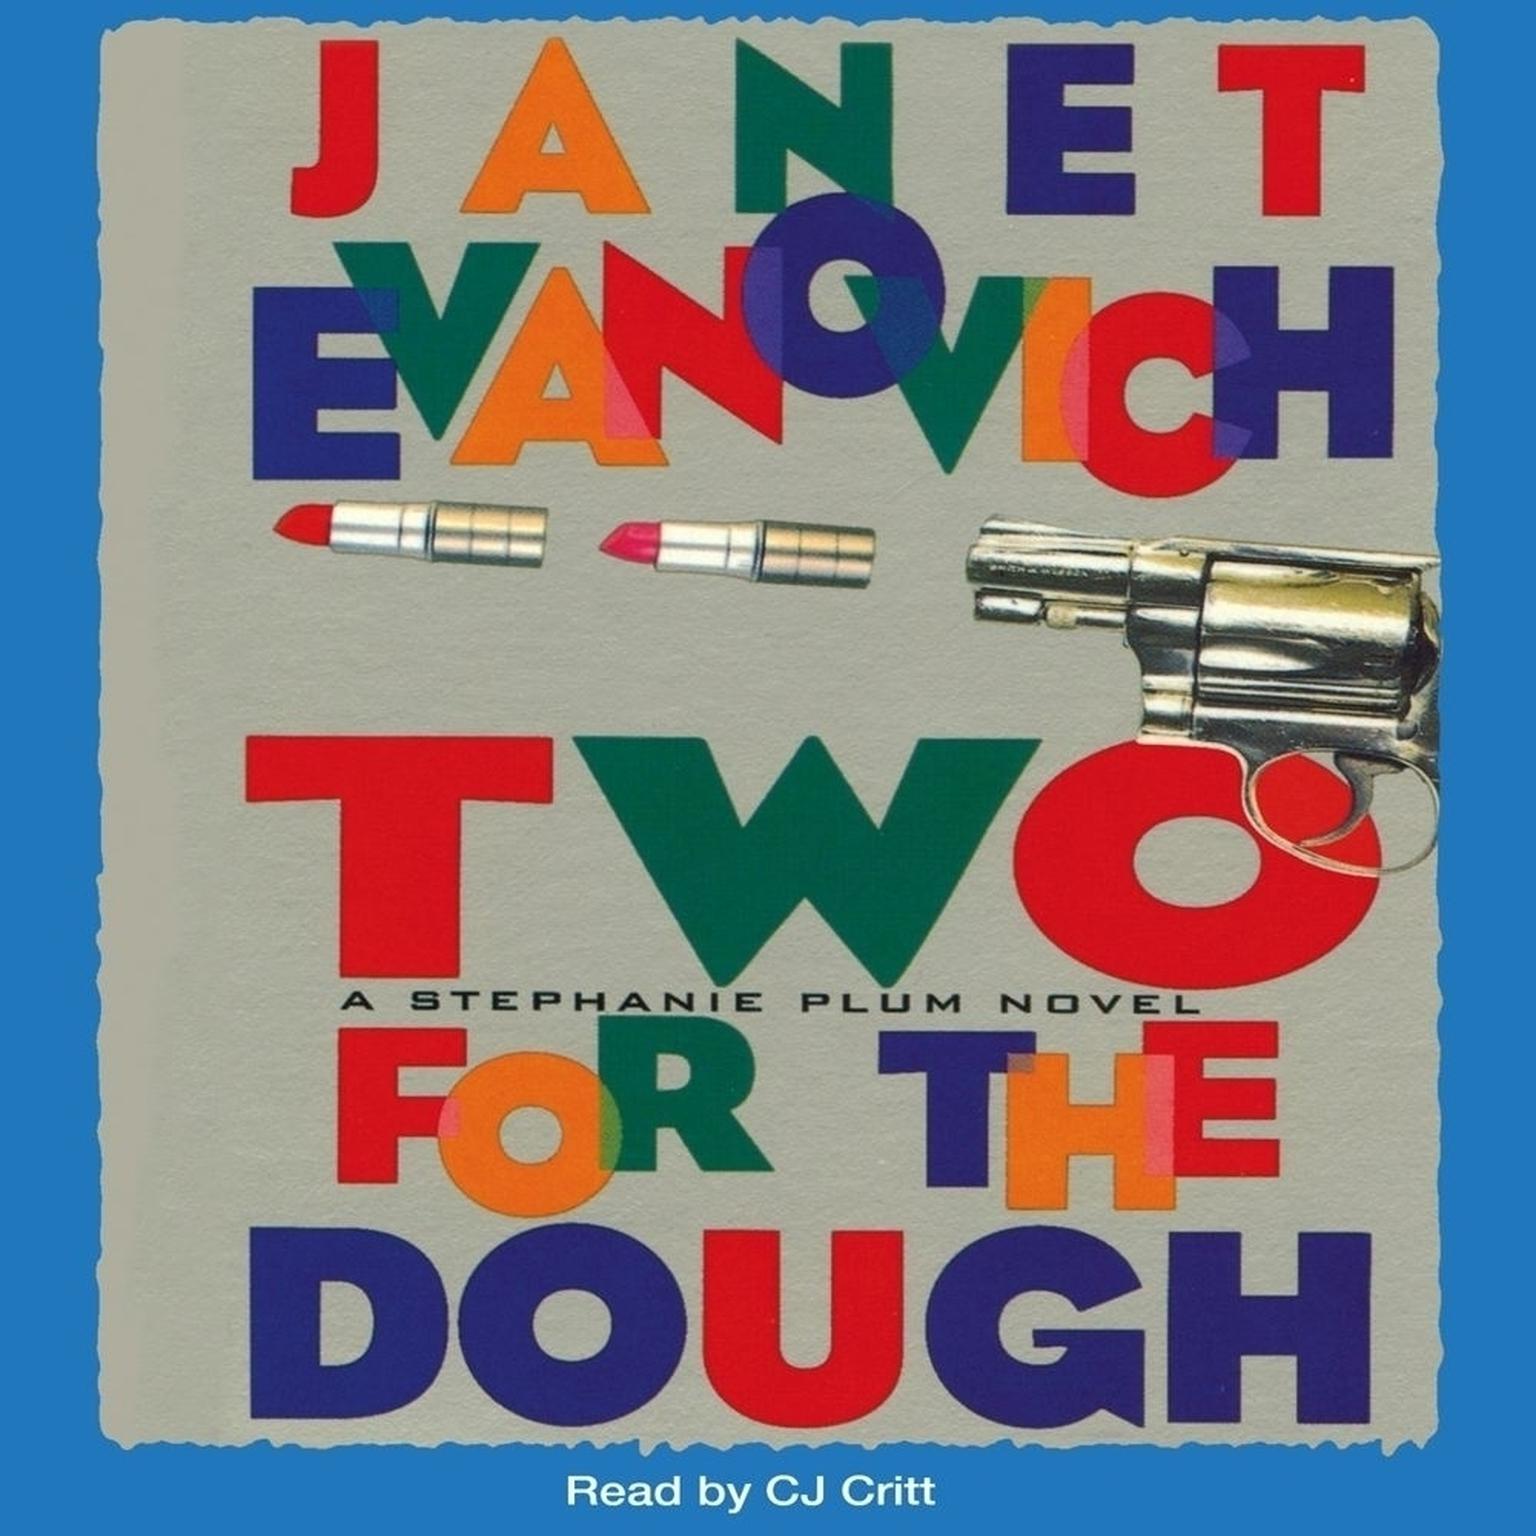 Two for the Dough Audiobook, by Janet Evanovich